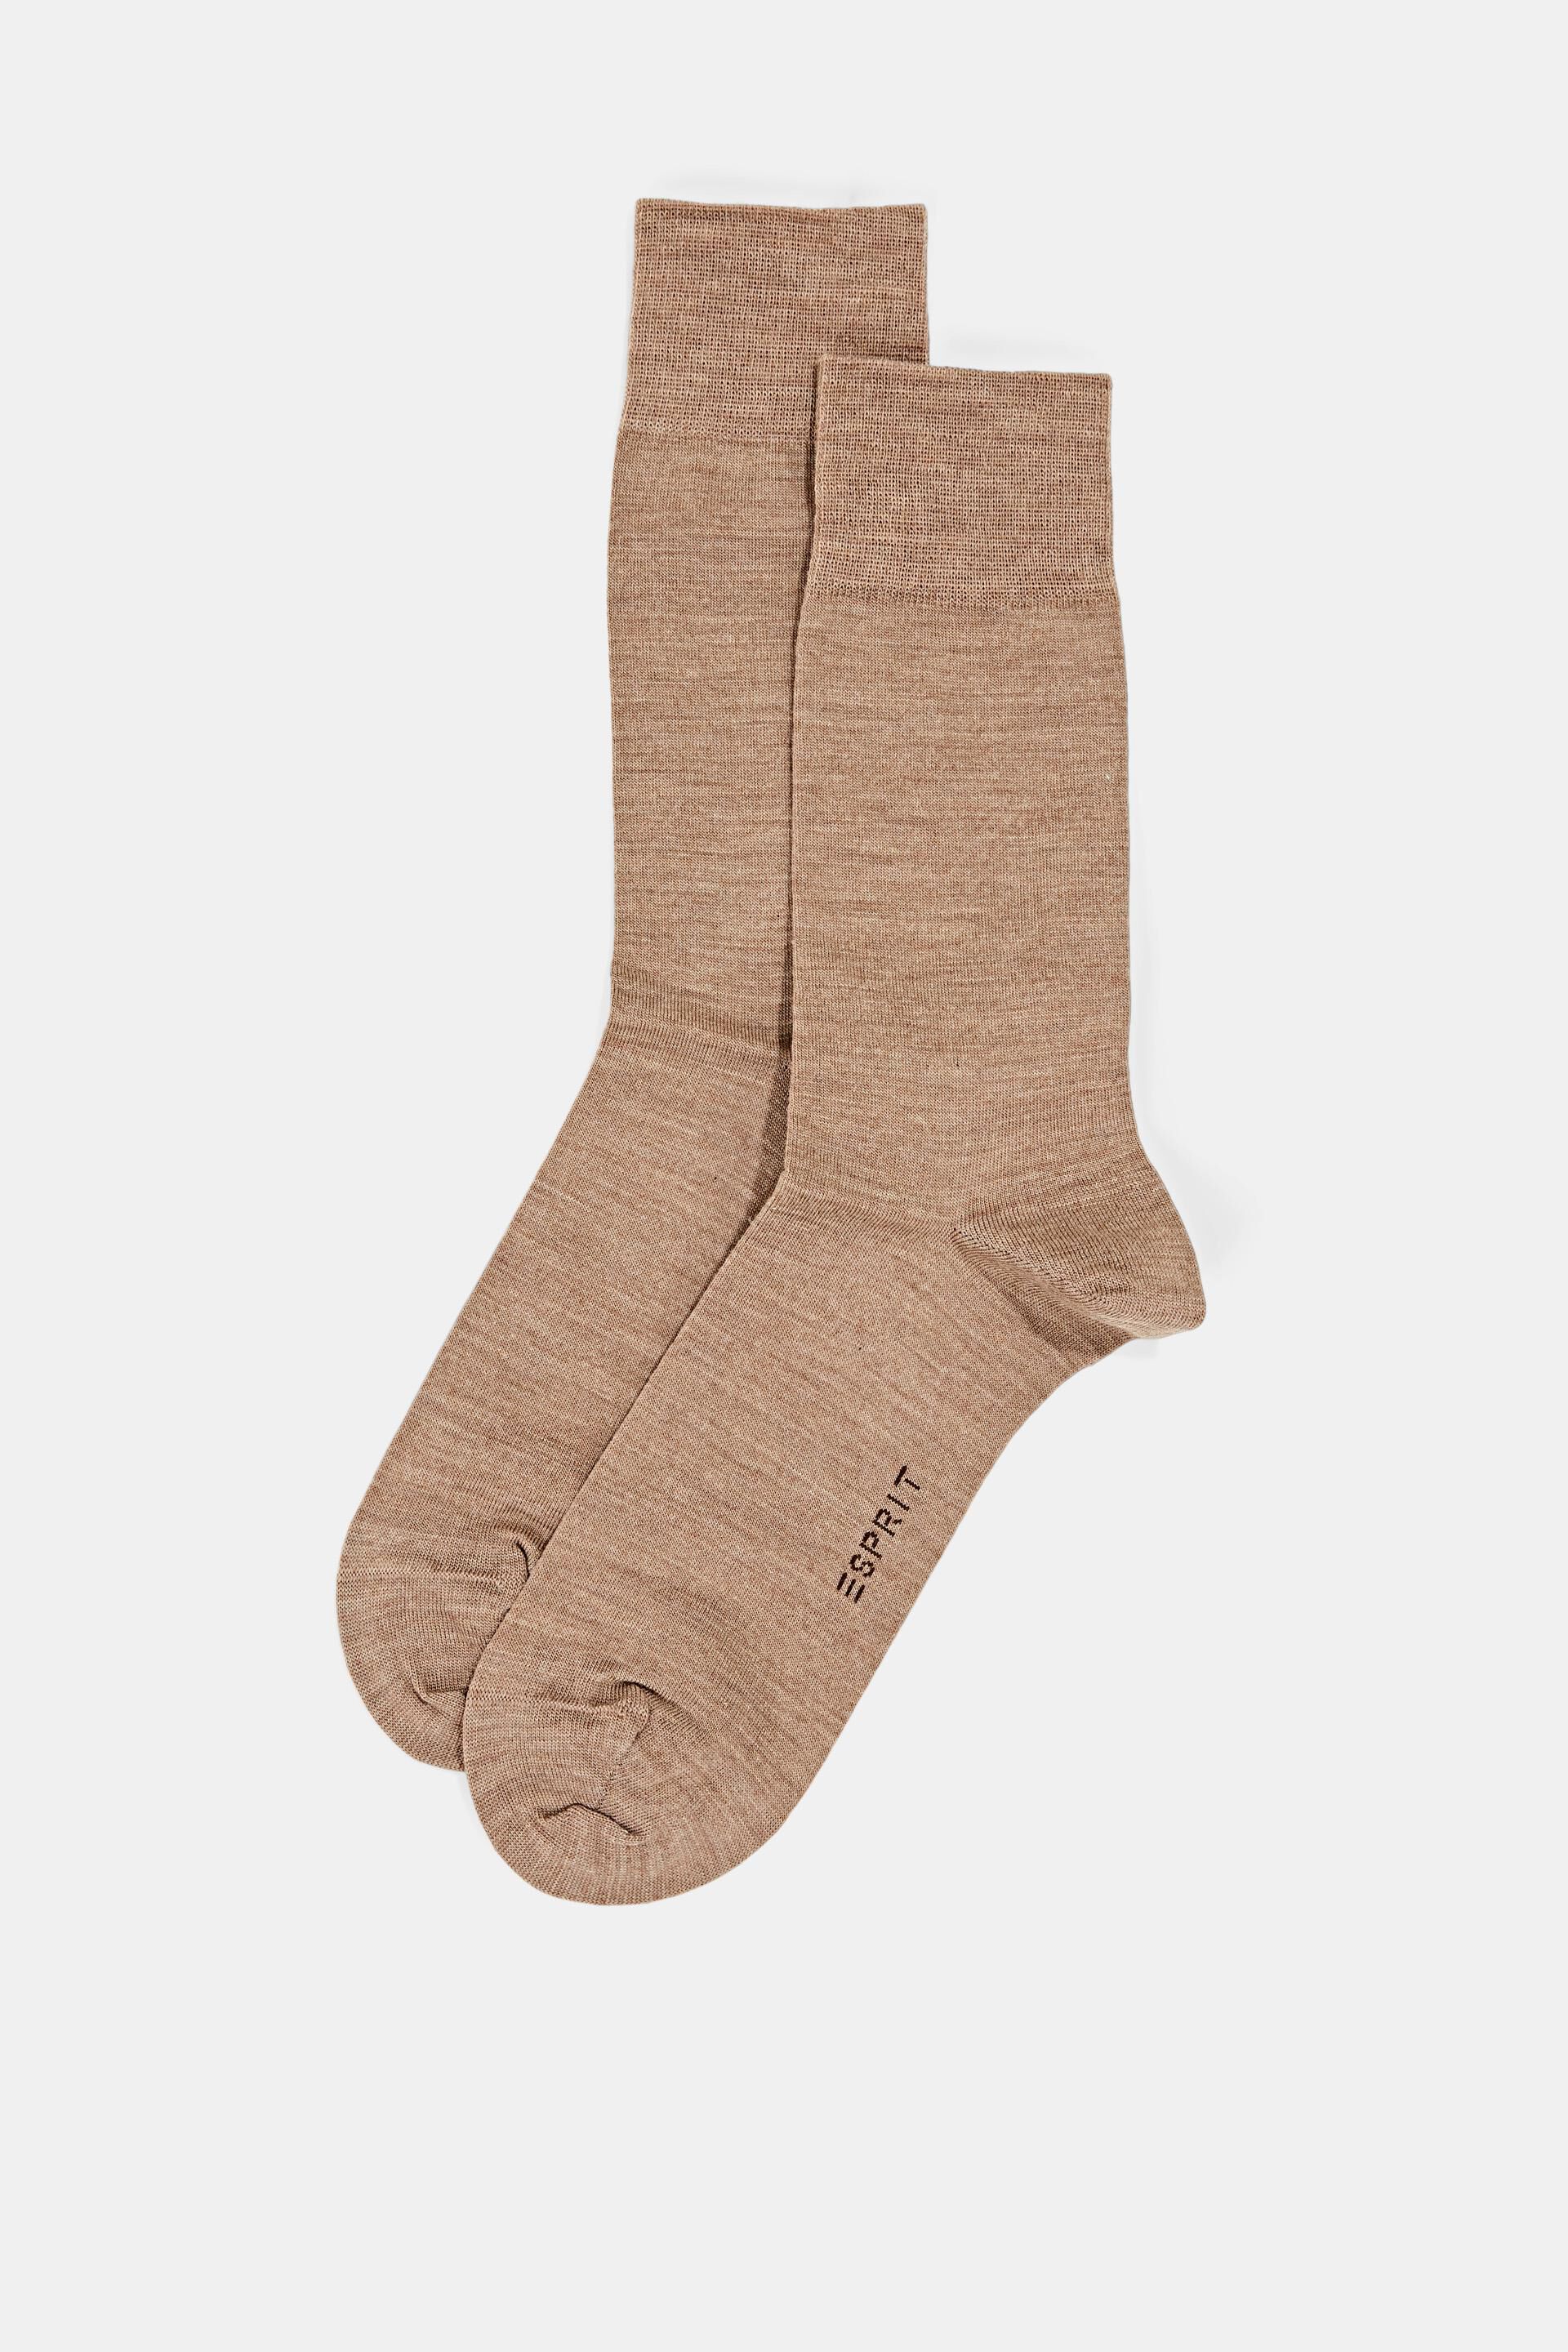 Esprit wool Double socks pack new fine of with knit